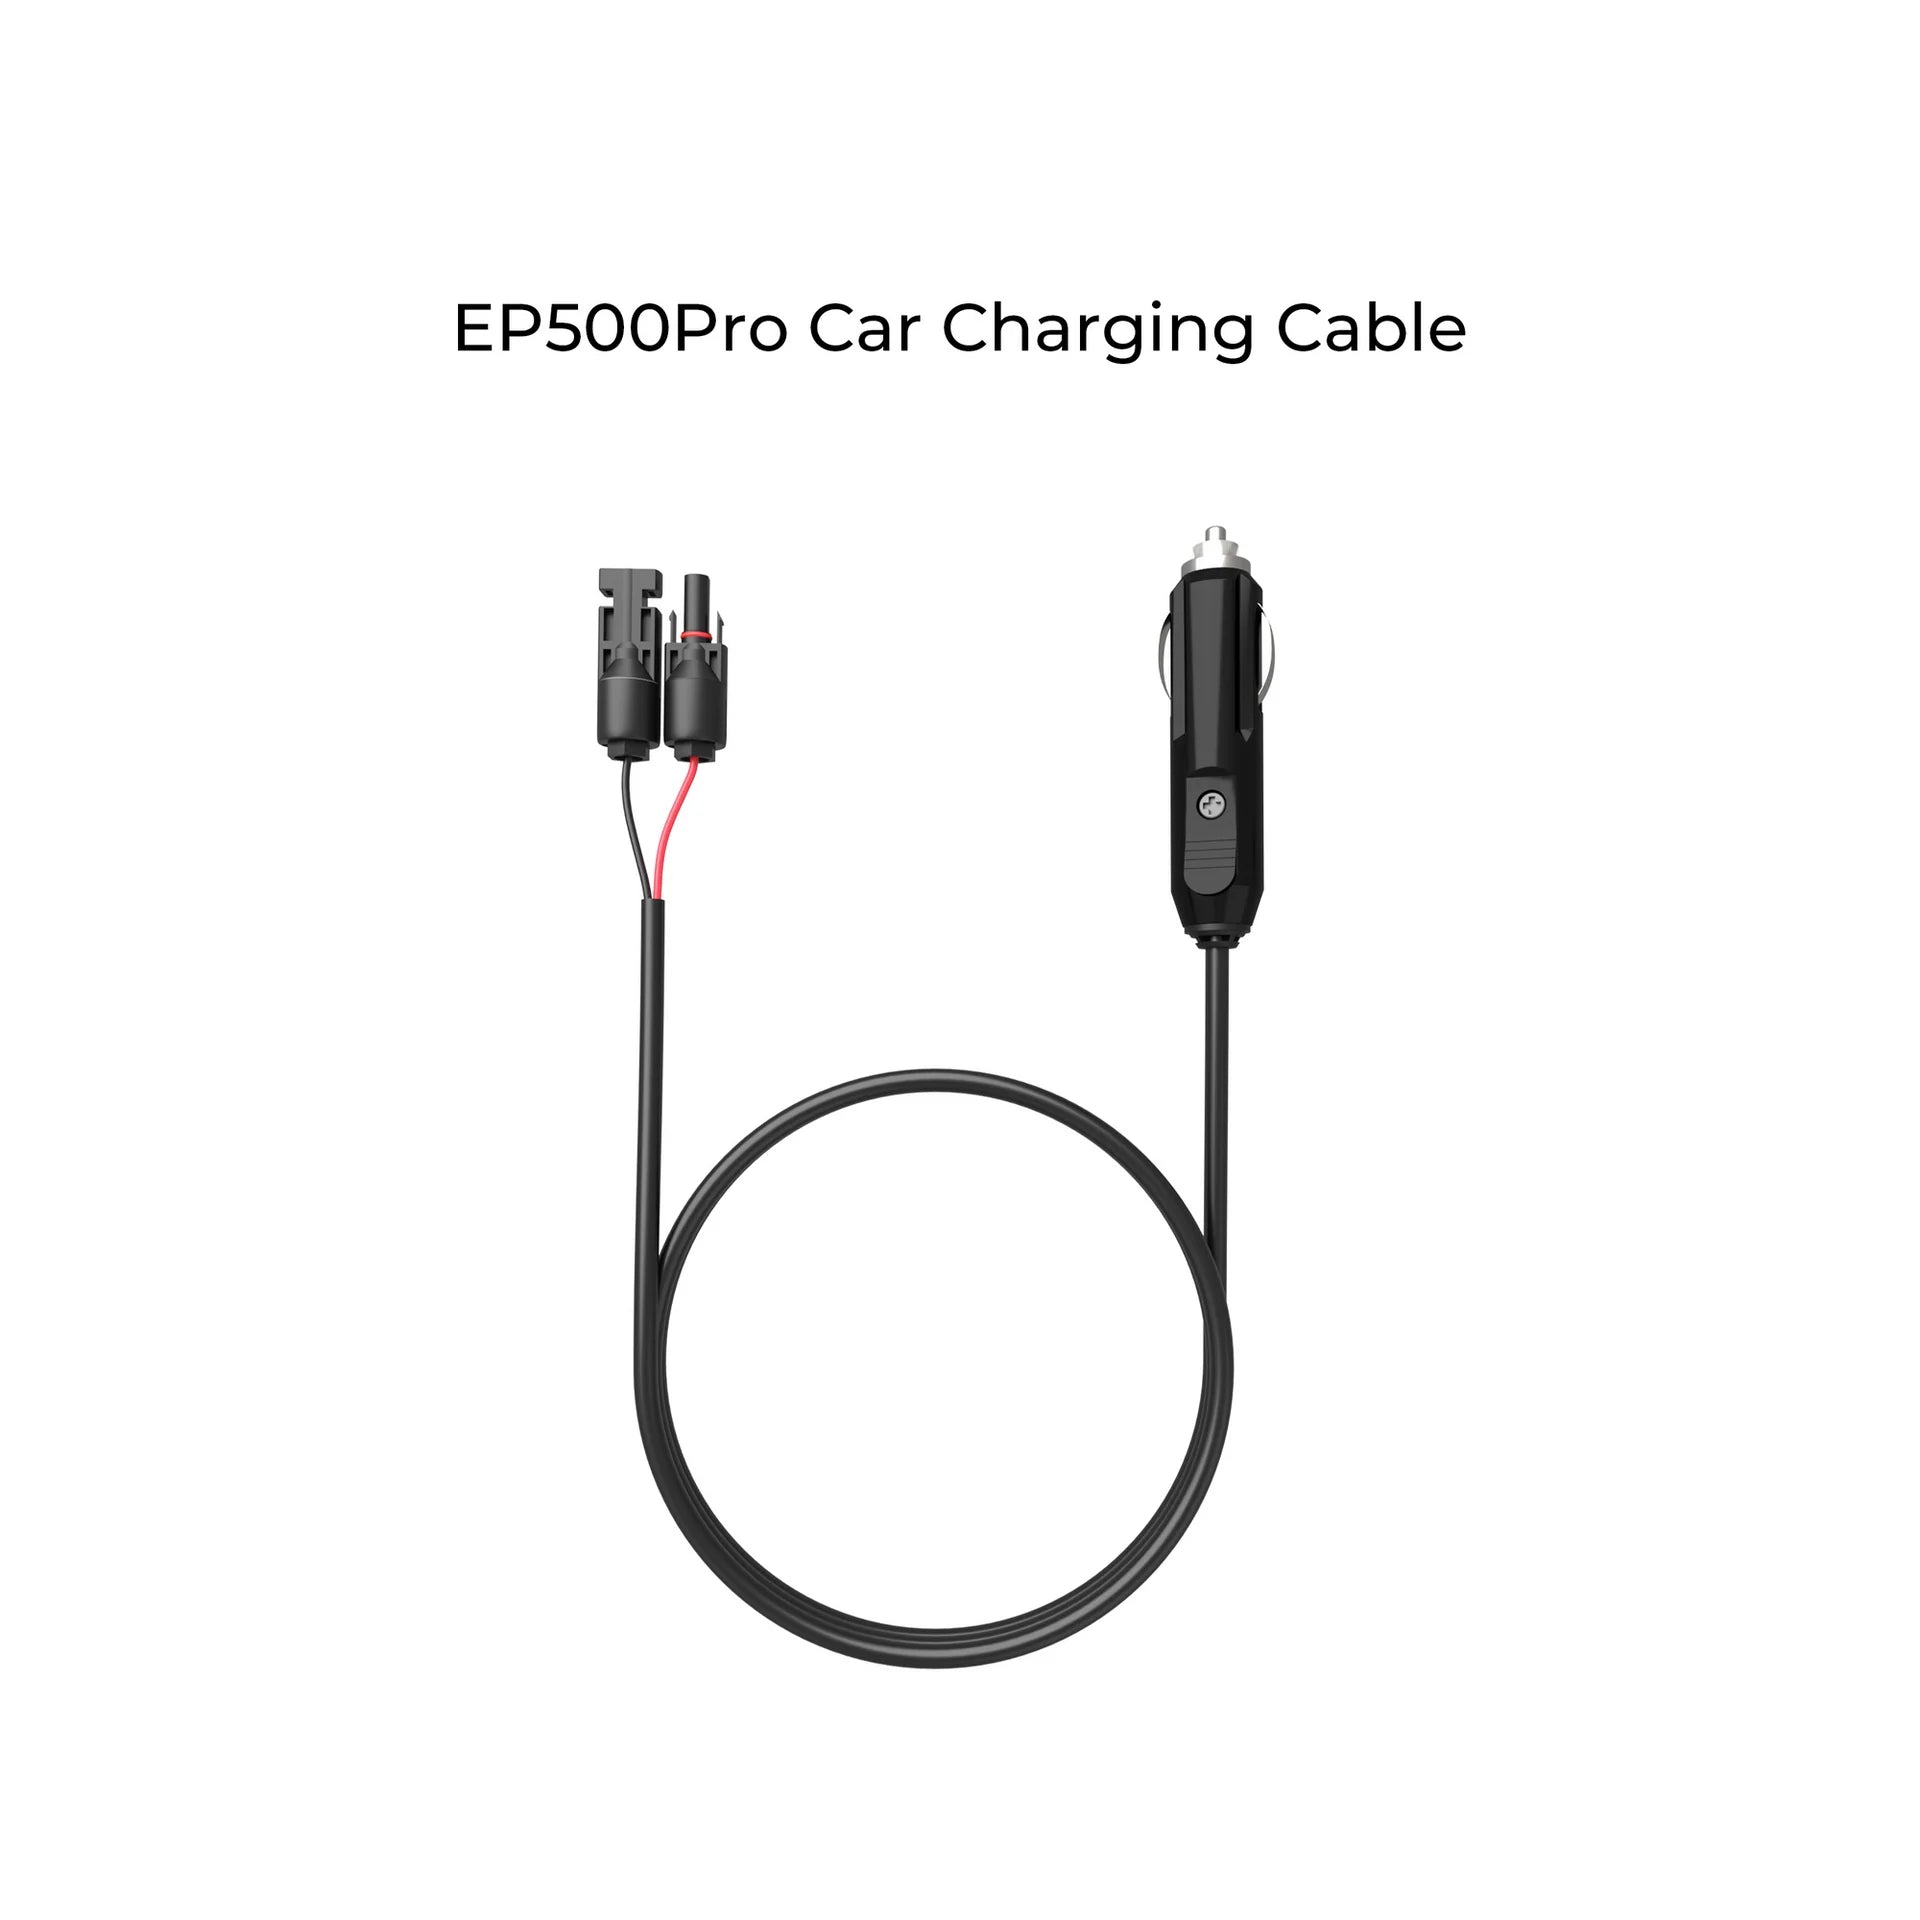 AC300/AC500 /EP500PRO Car Charging Cable